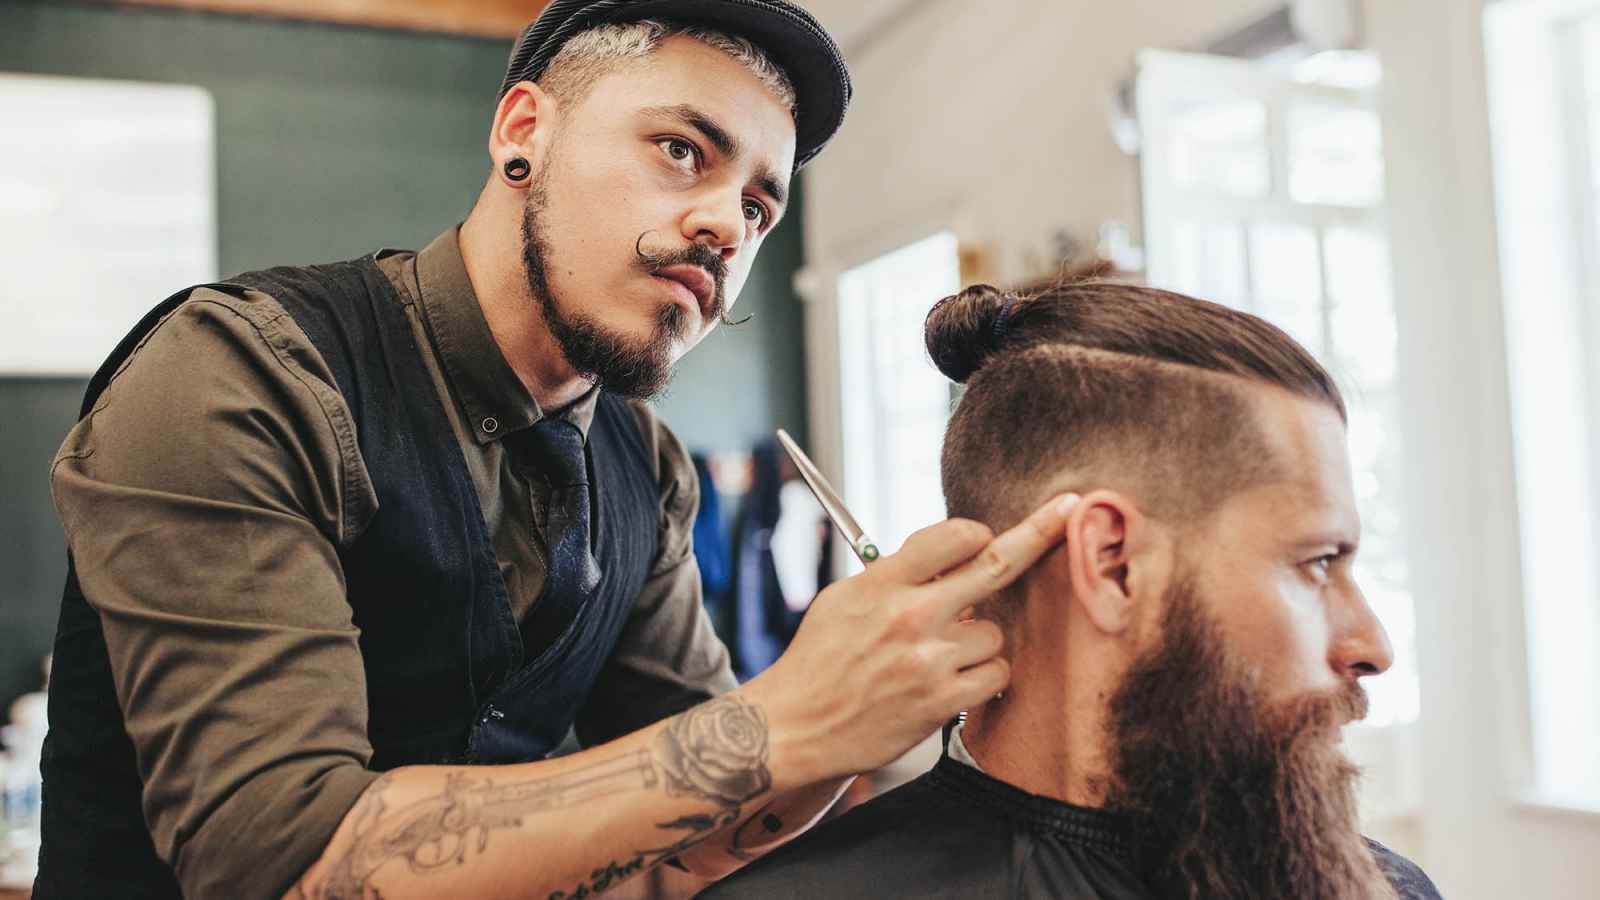 National Barber Mental Health Awareness Day 2023: Date, History, Facts about Barbers